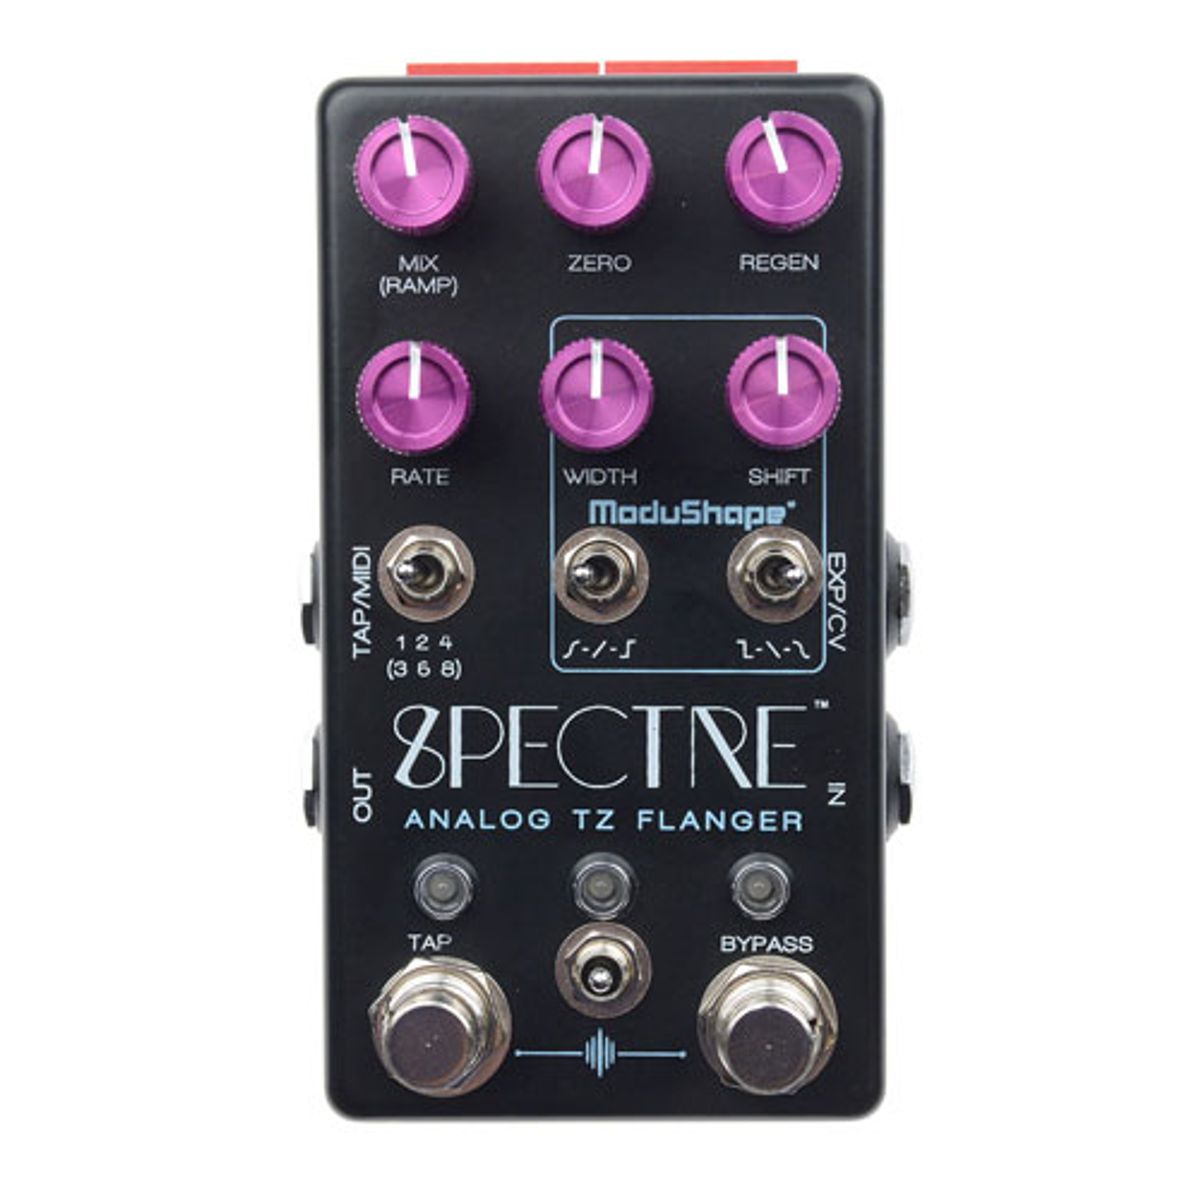 Chase Bliss Audio Introduces the Spectre Analog Through-Zero Flanger